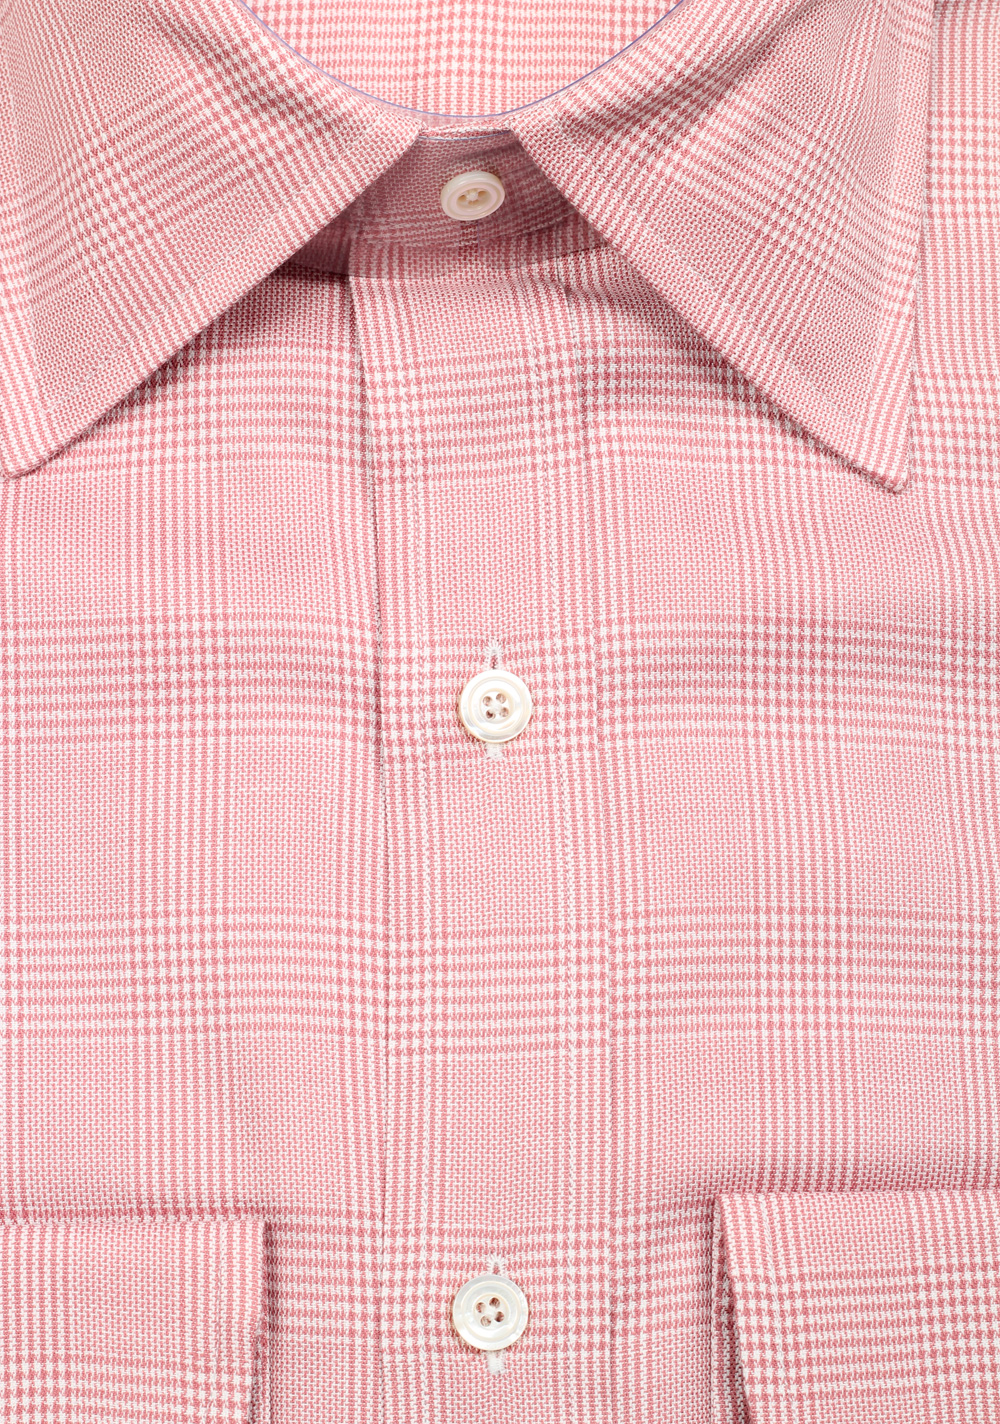 TOM FORD Checked White Pink Dress Shirt Size 40 / 15,75 U.S. | Costume Limité